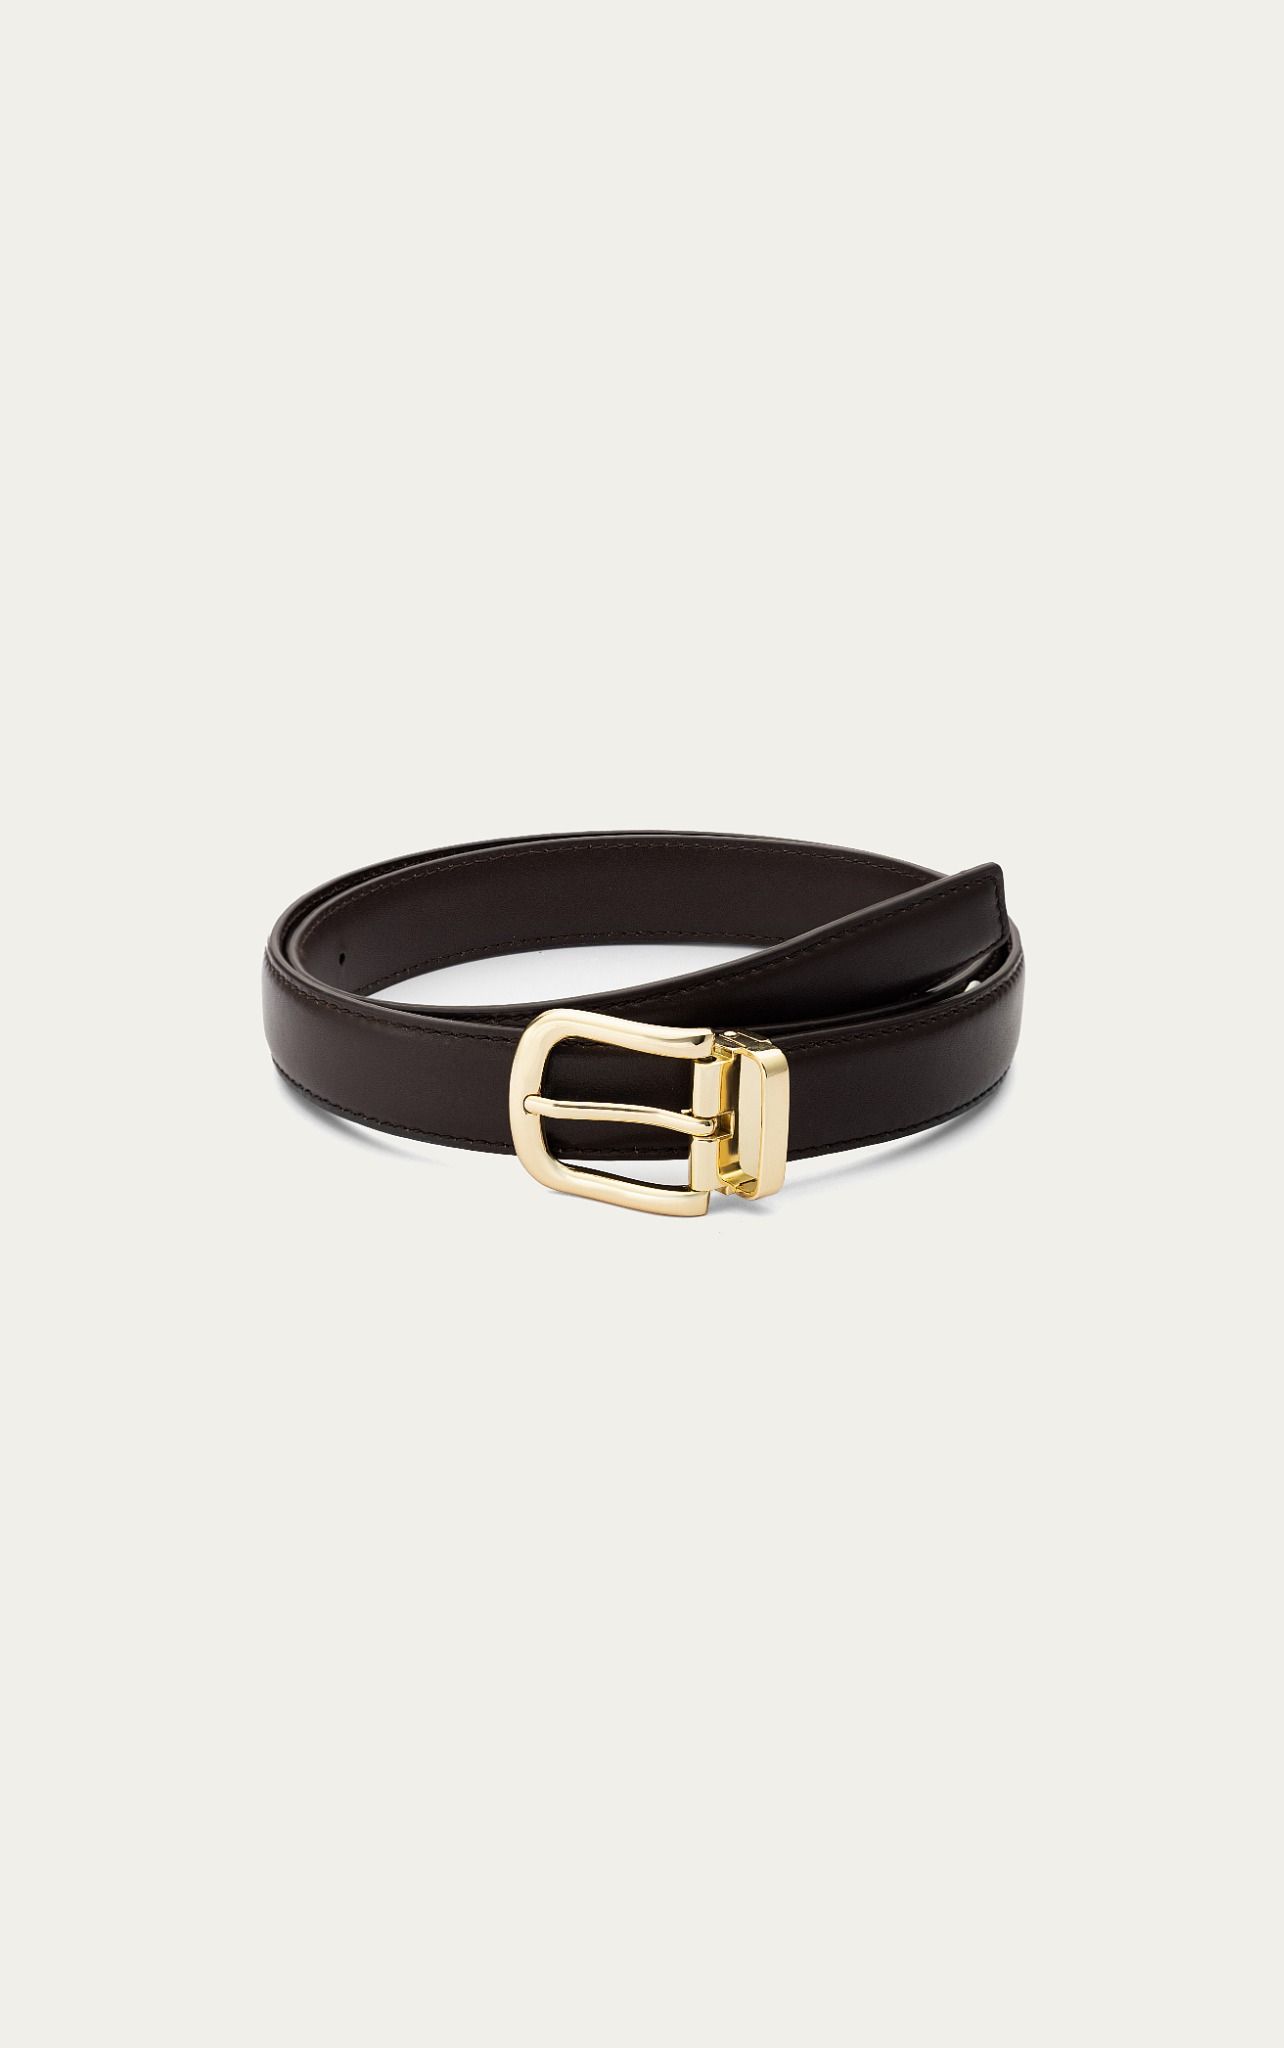  AG LEATHER BELTS BROWN - SQUARE HEAD GOLD 